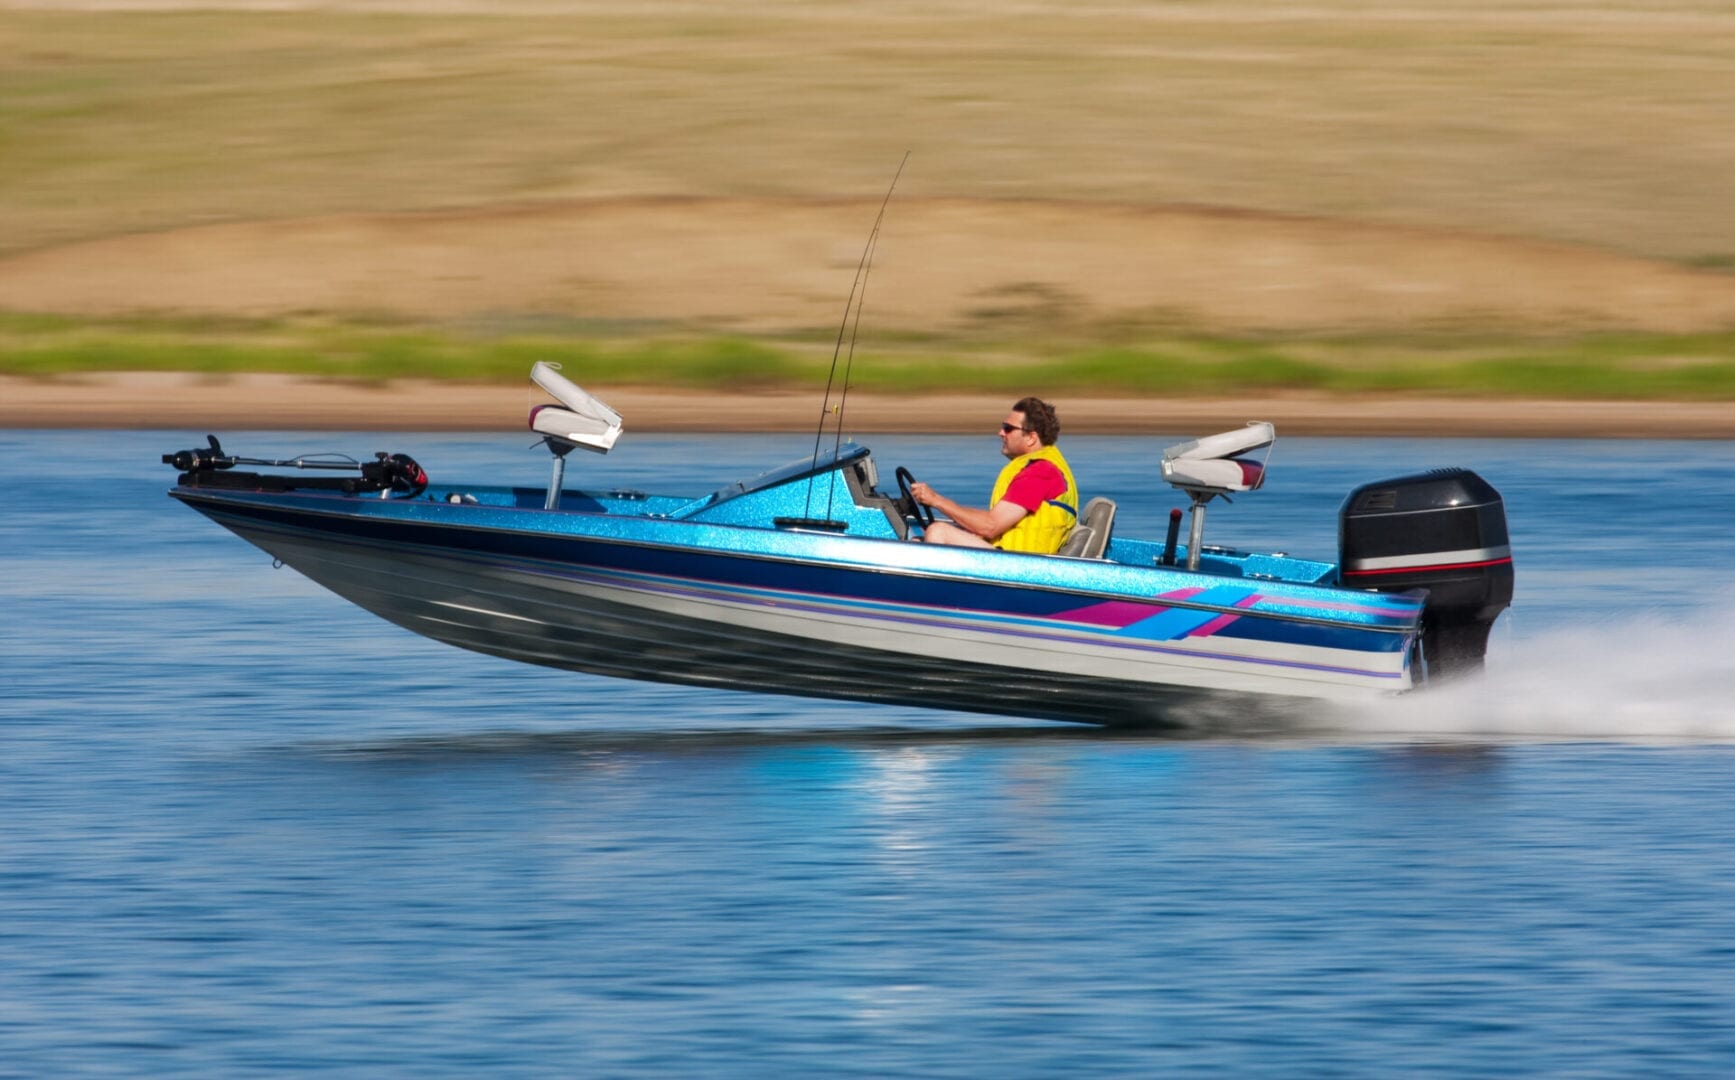 Man driving a fast boat with panned (motion blur) background